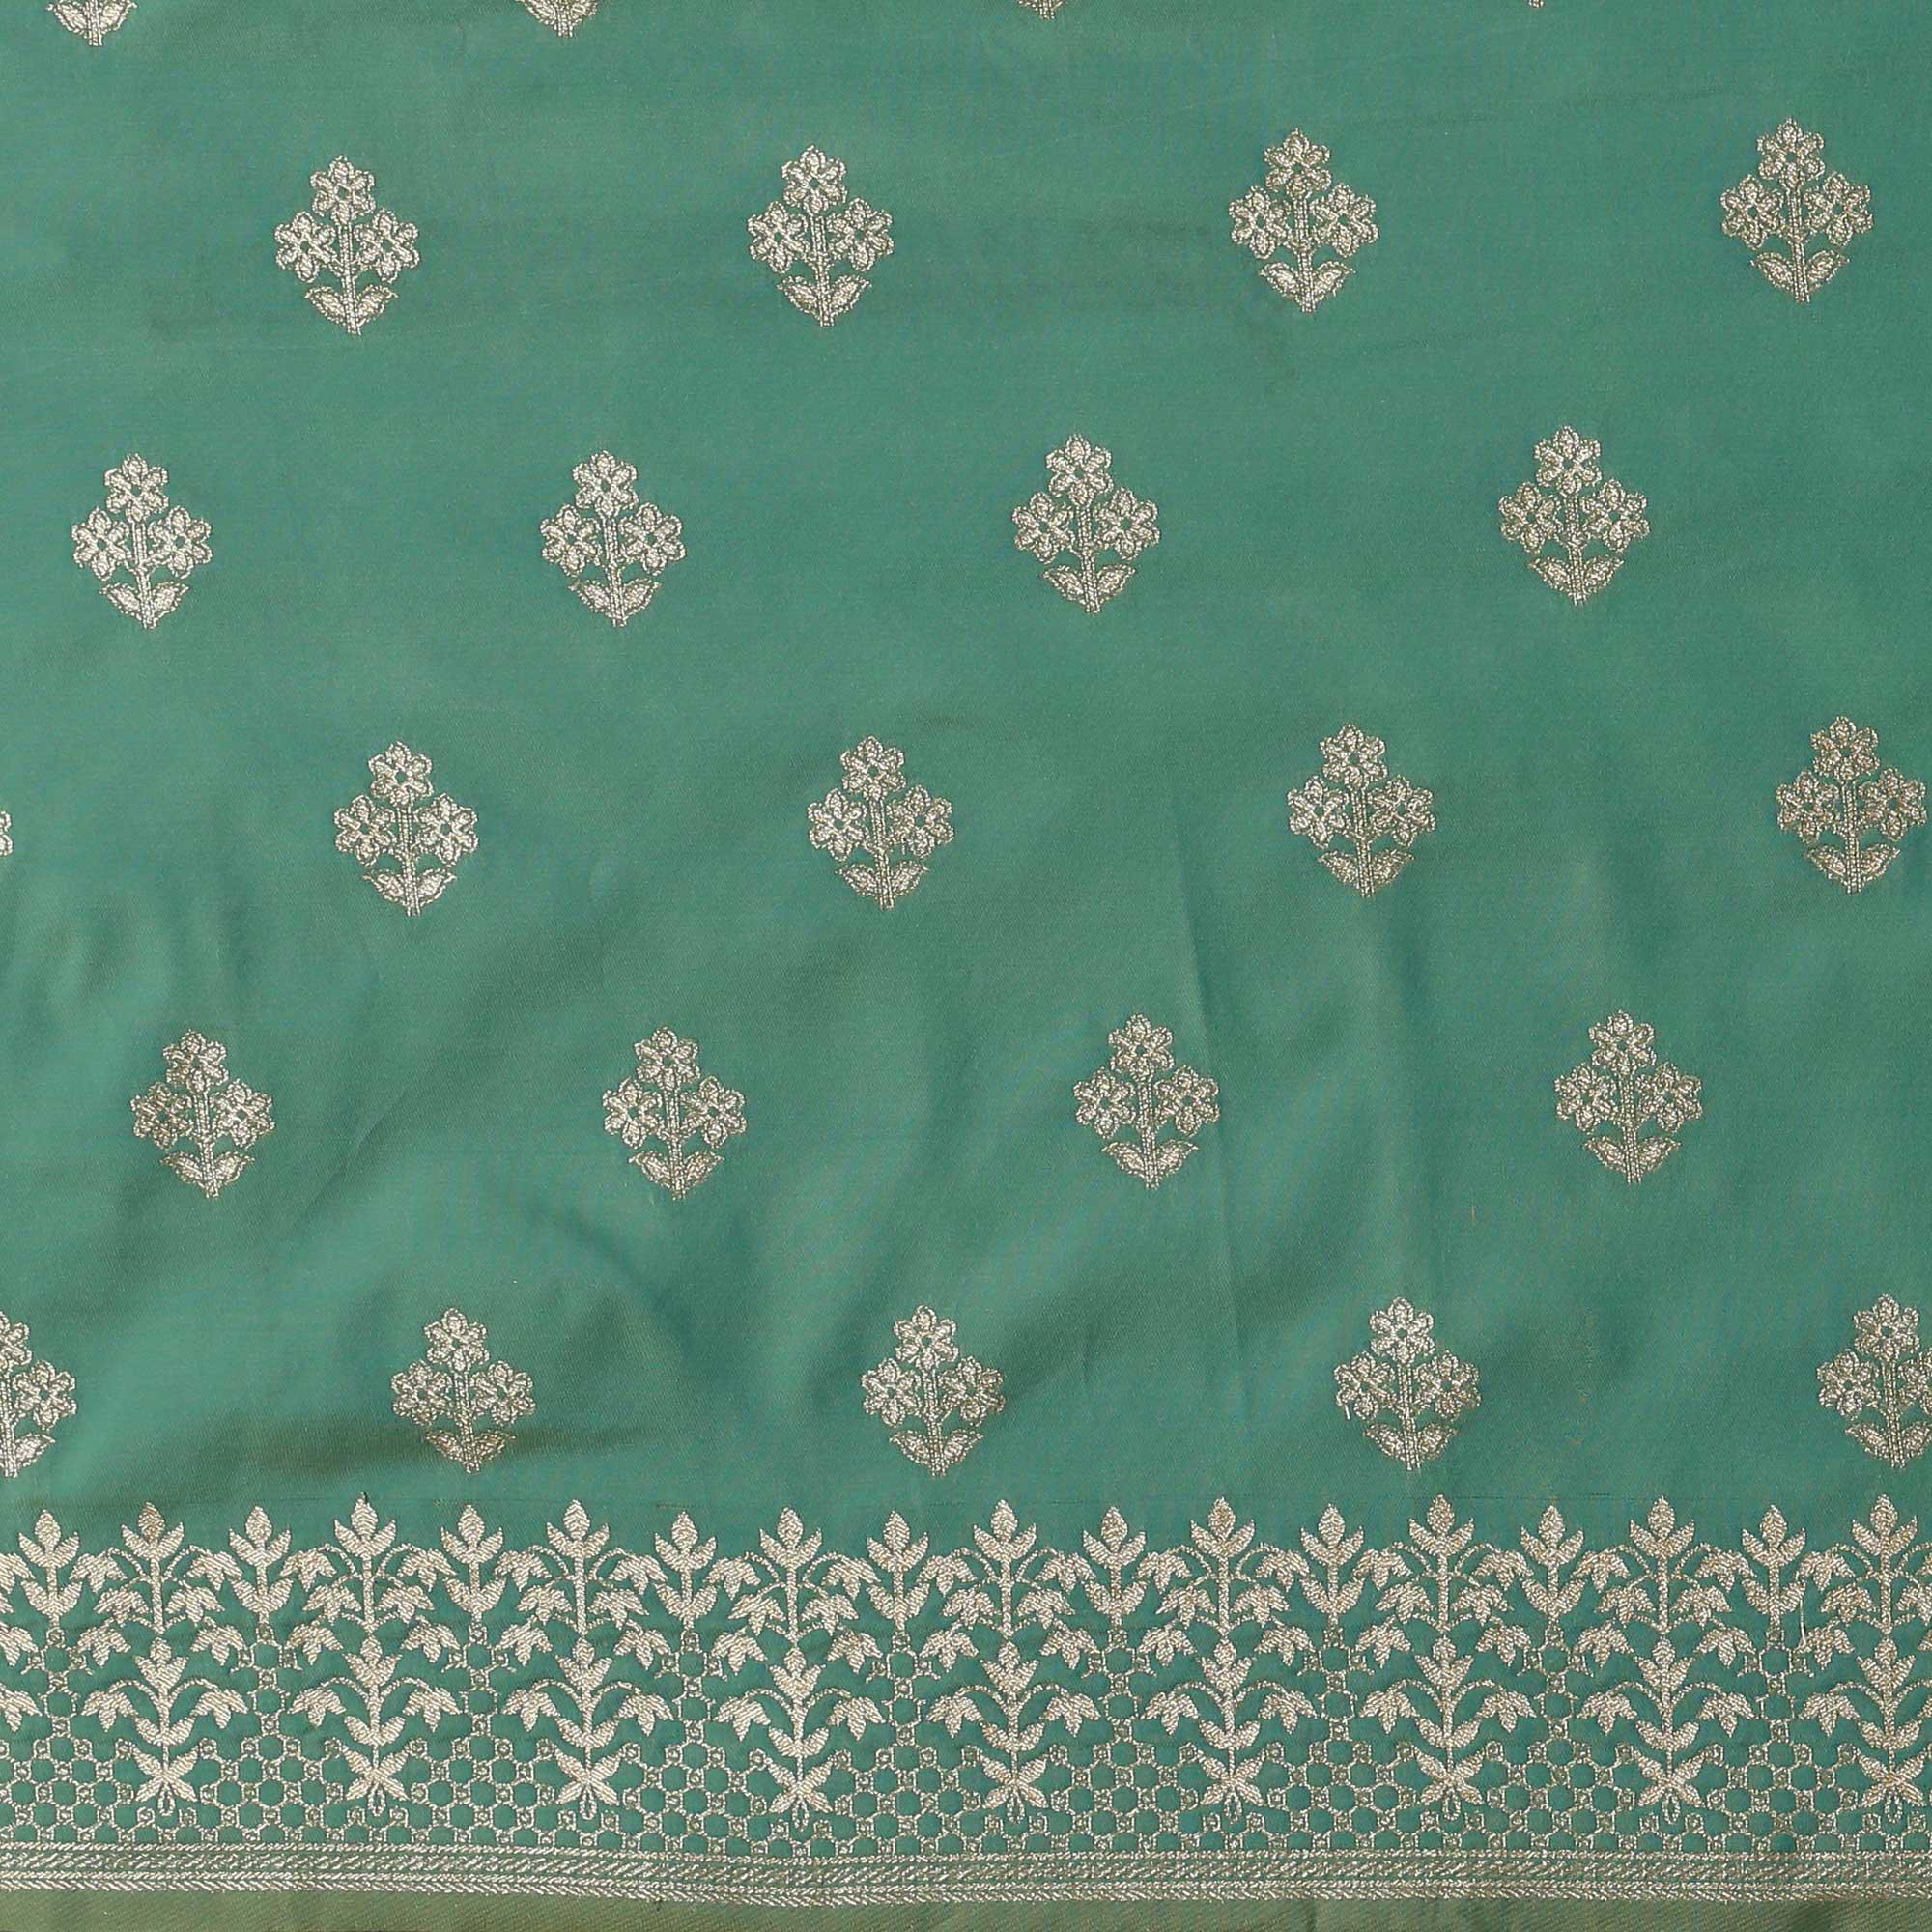 Mesmerising Sea Green Colored Festive Wear Silk Blend Woven Floral Saree With Tassels - Peachmode